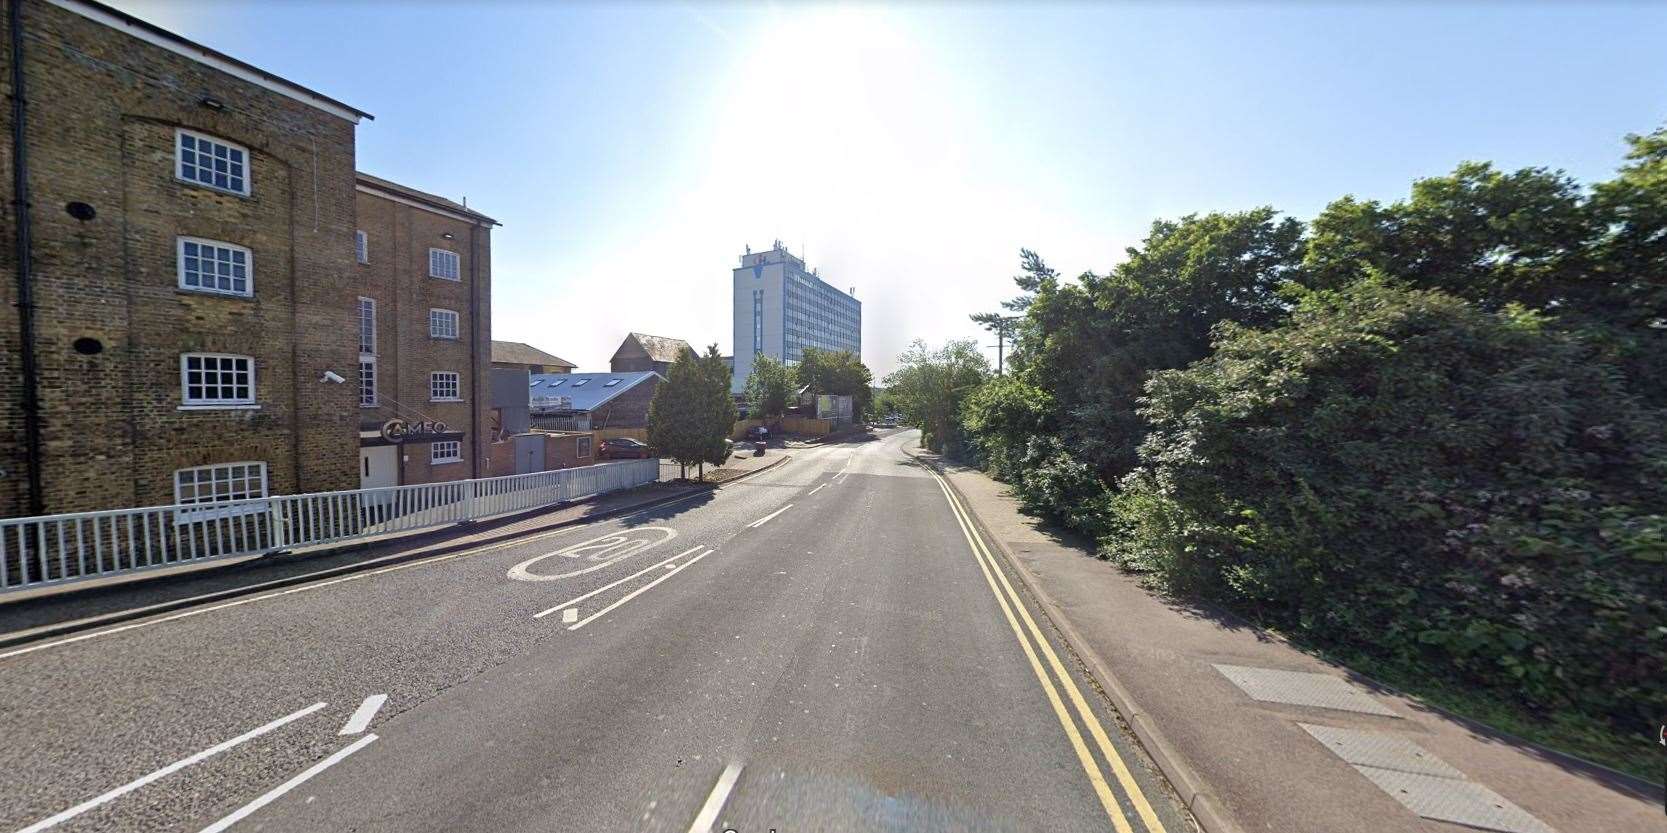 The incident happened on Station Approach, Ashford. Photo: Google Street View